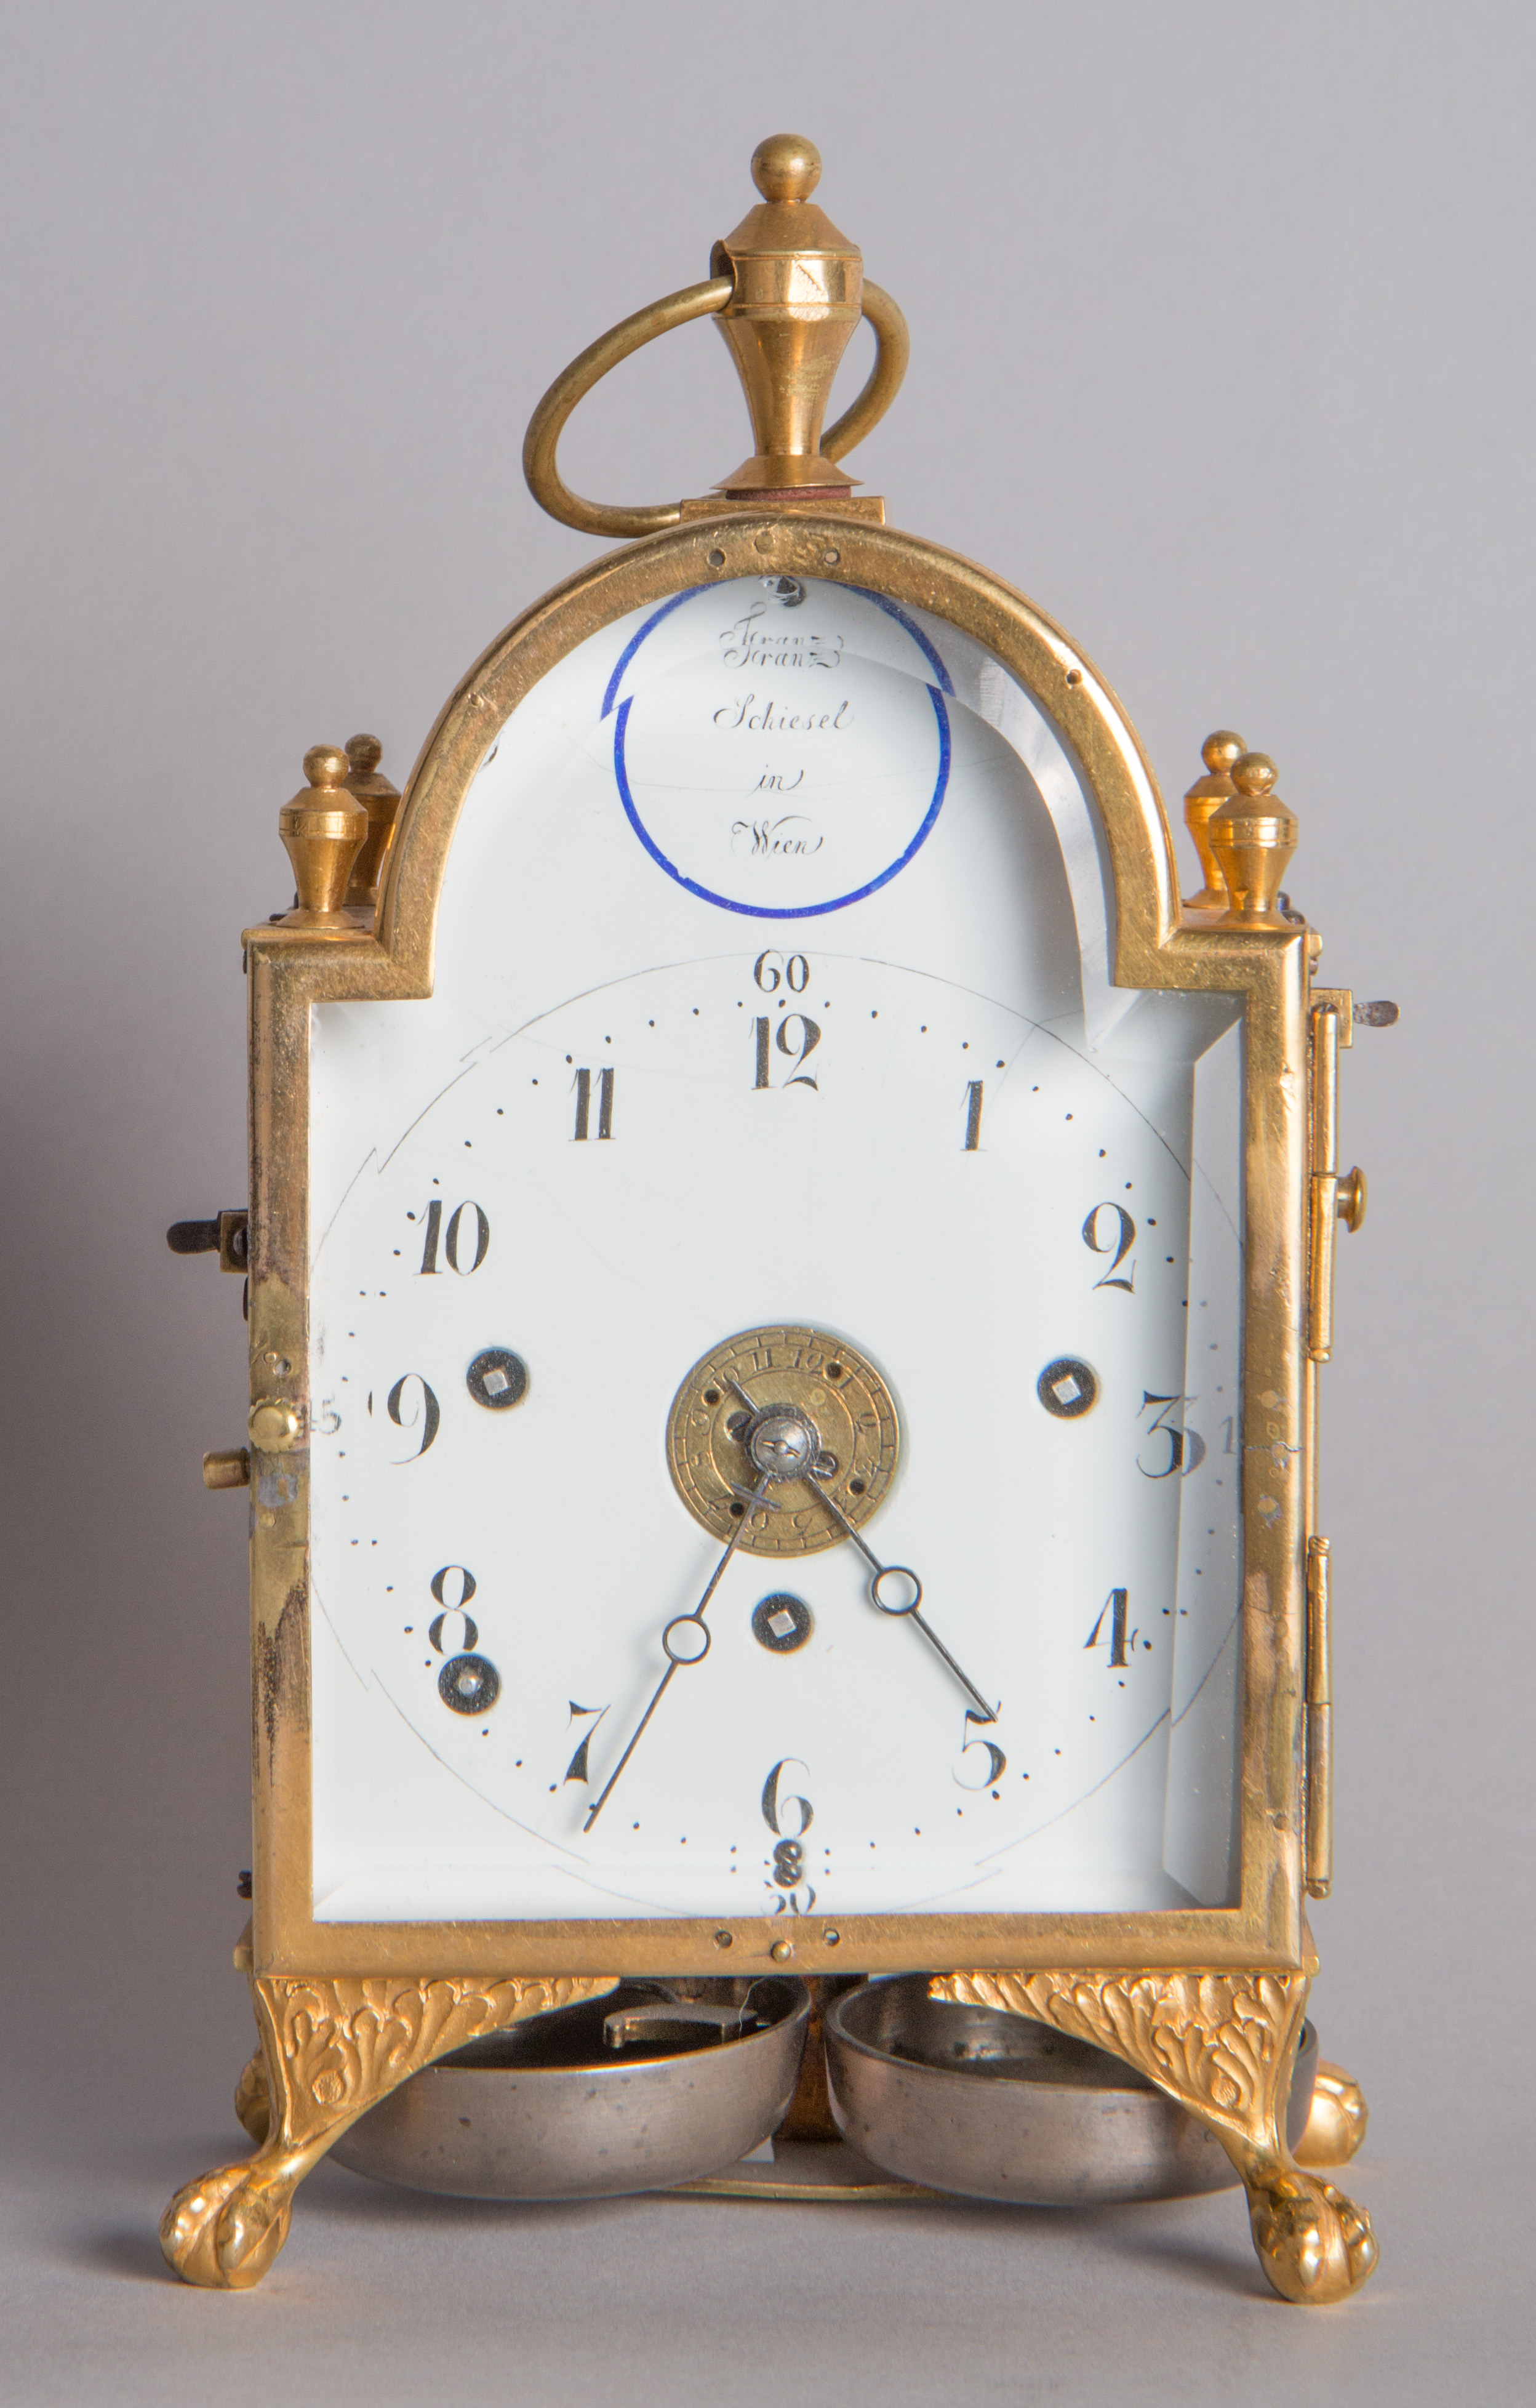 Carriage clock by Franz Schiesel, c. 1800.